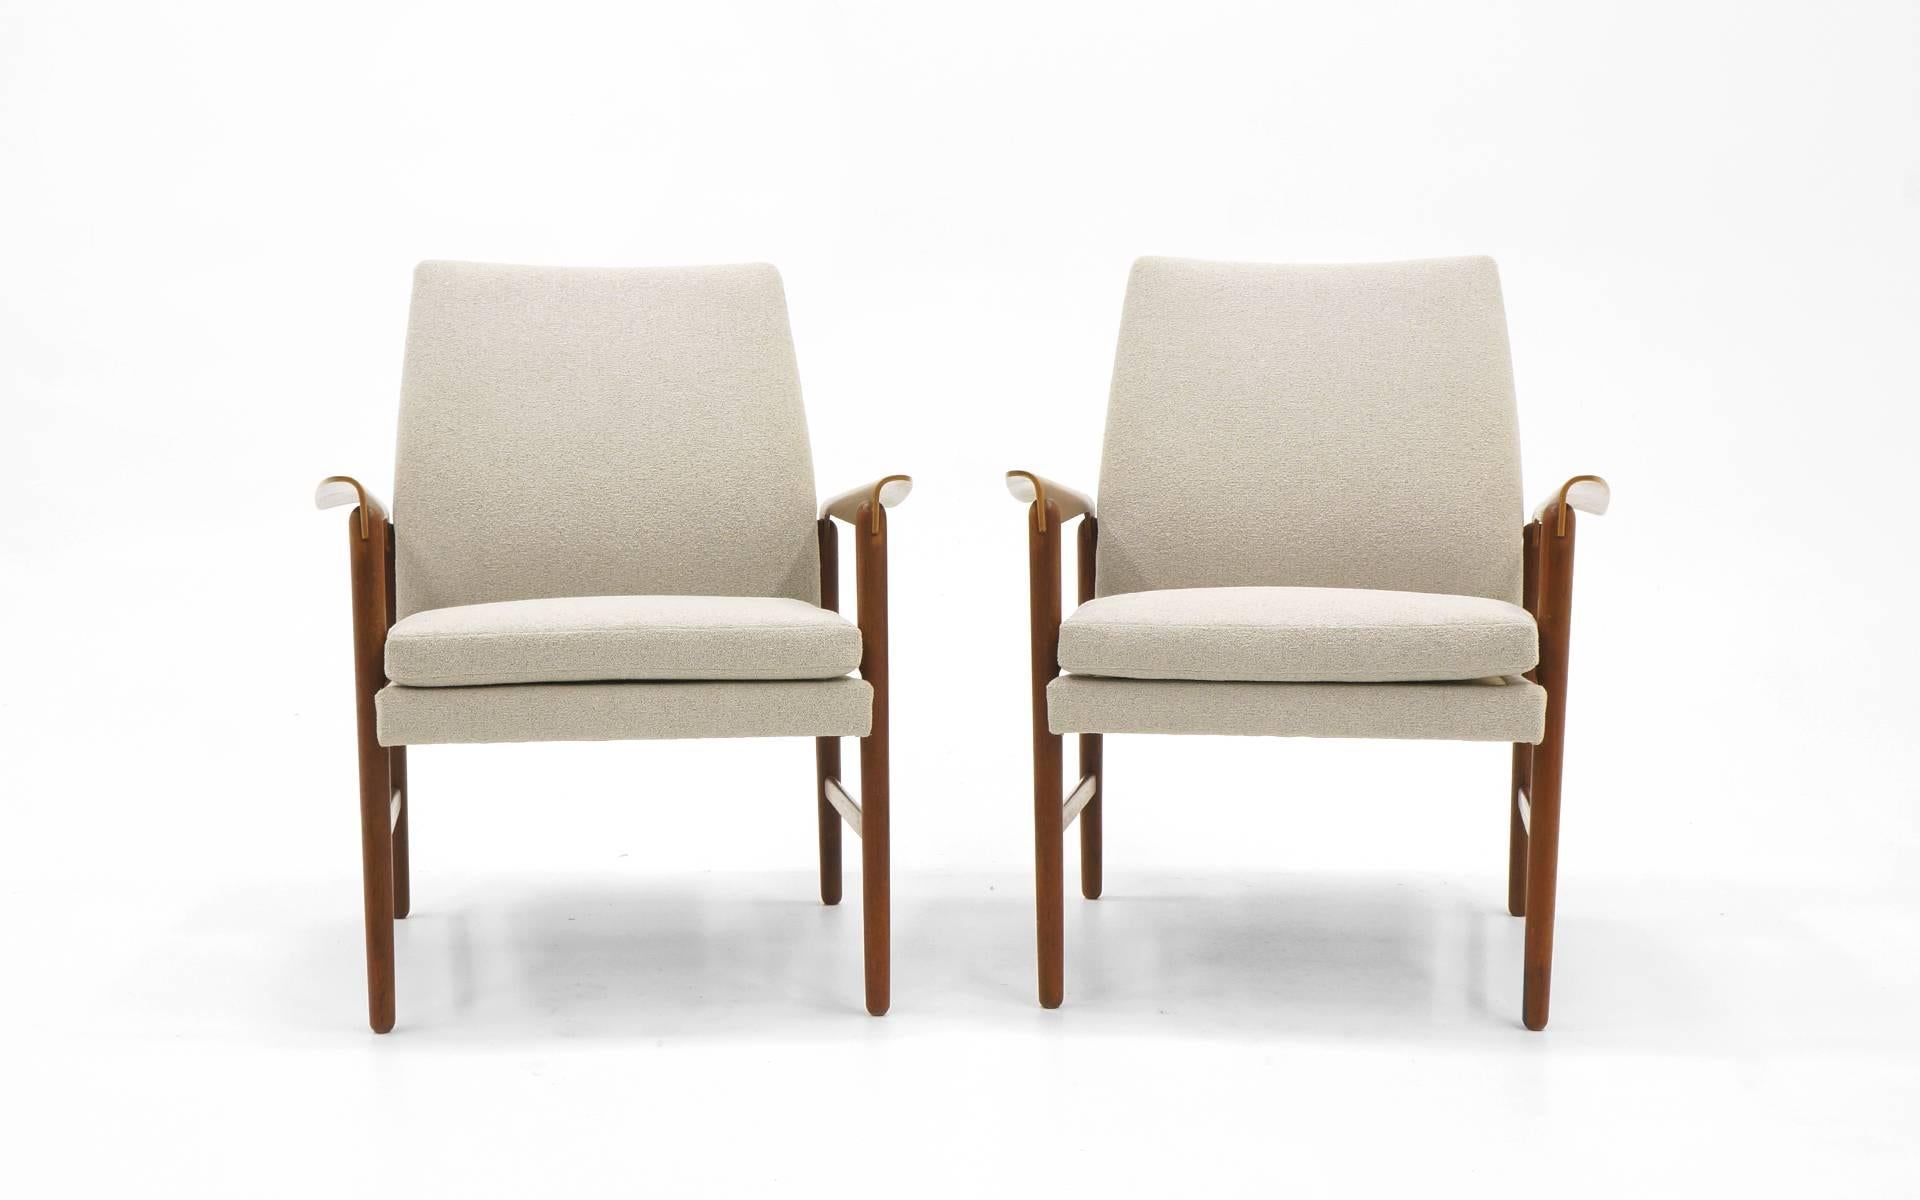 Pair of matching lounge chairs with arms manufactured by Fritz Hansen, Denmark, 1950s. Expertly restored and reupholstered in a neutral / off white / cream color Knoll fabric. Teak frames with the original finish. Very comfortable. Really a great